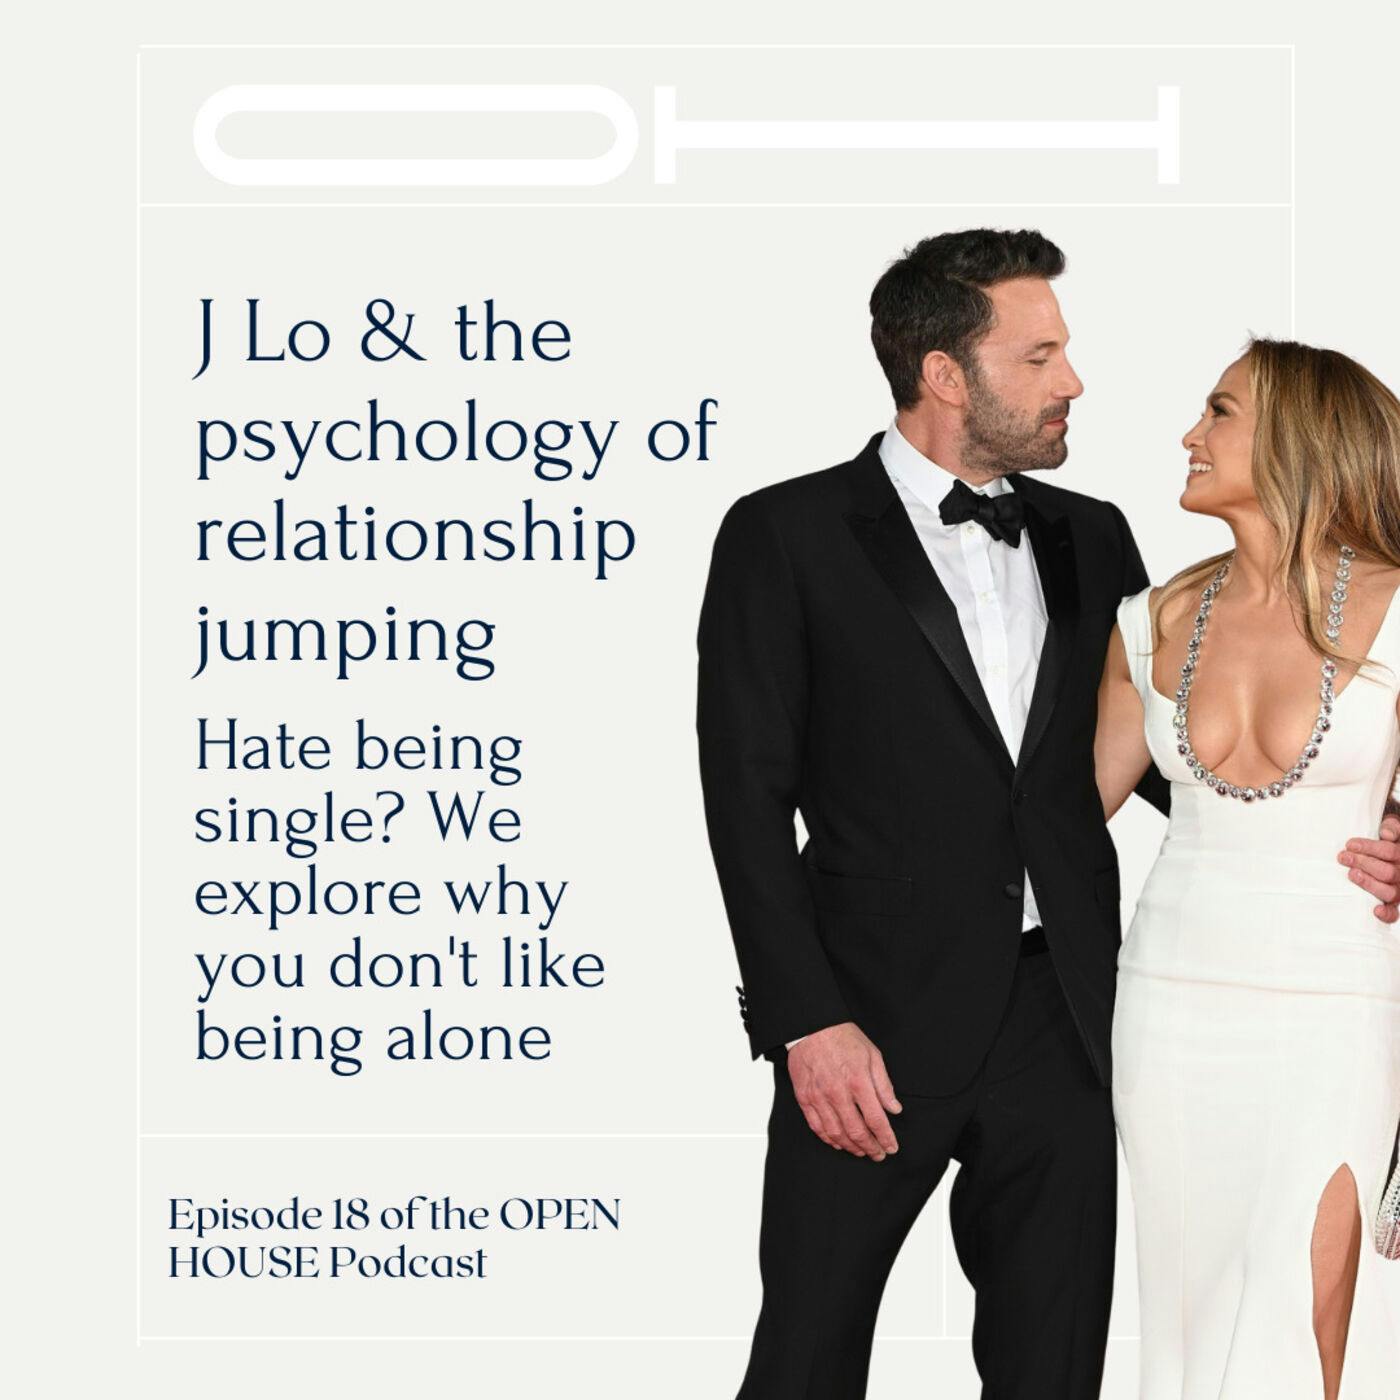 18 - RELATIONSHIP JUMPING - J Lo & the psychology of relationship jumping